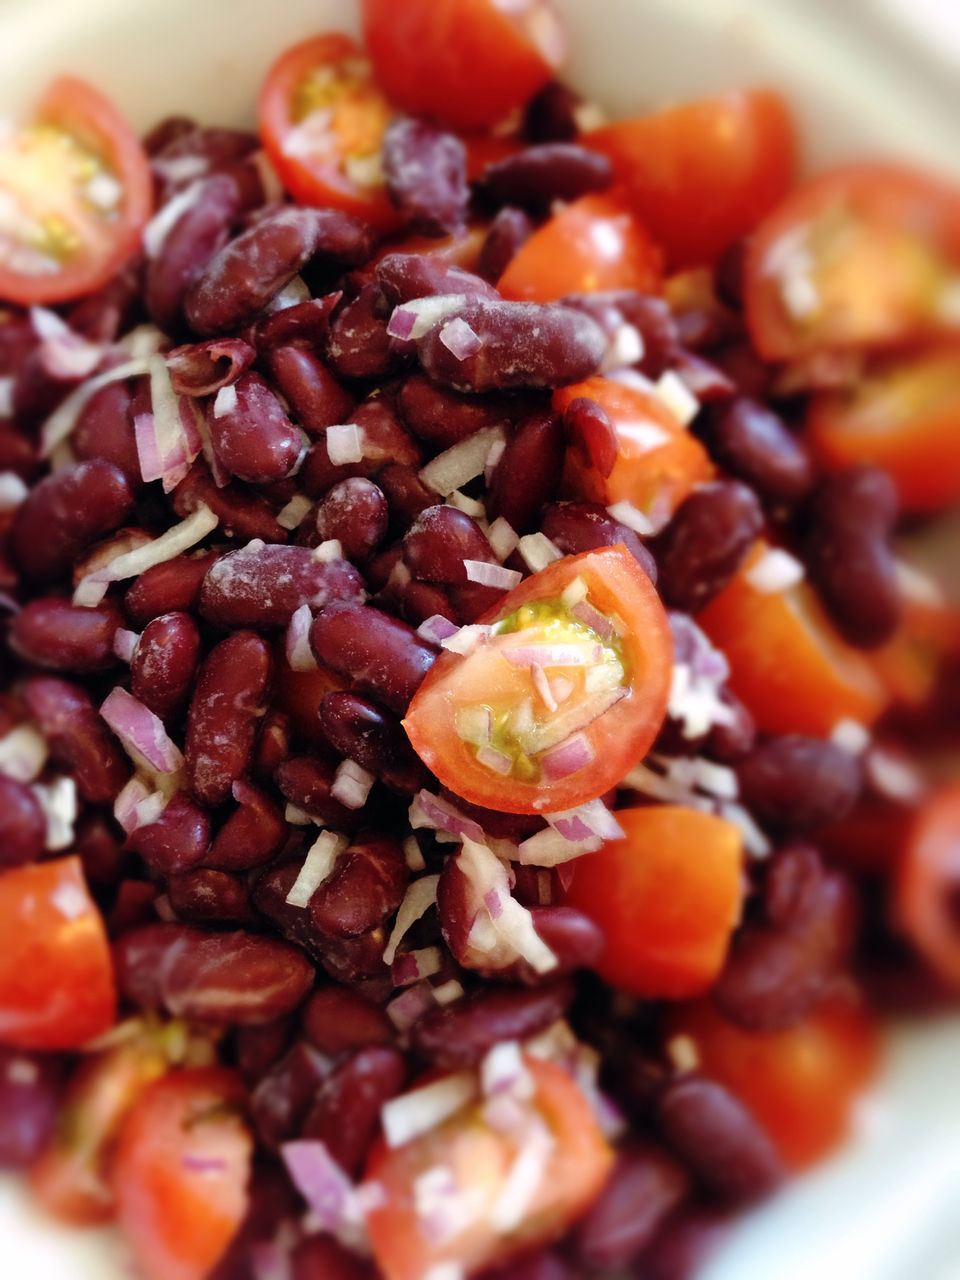 Close-up of sliced tomatoes with kidney beans